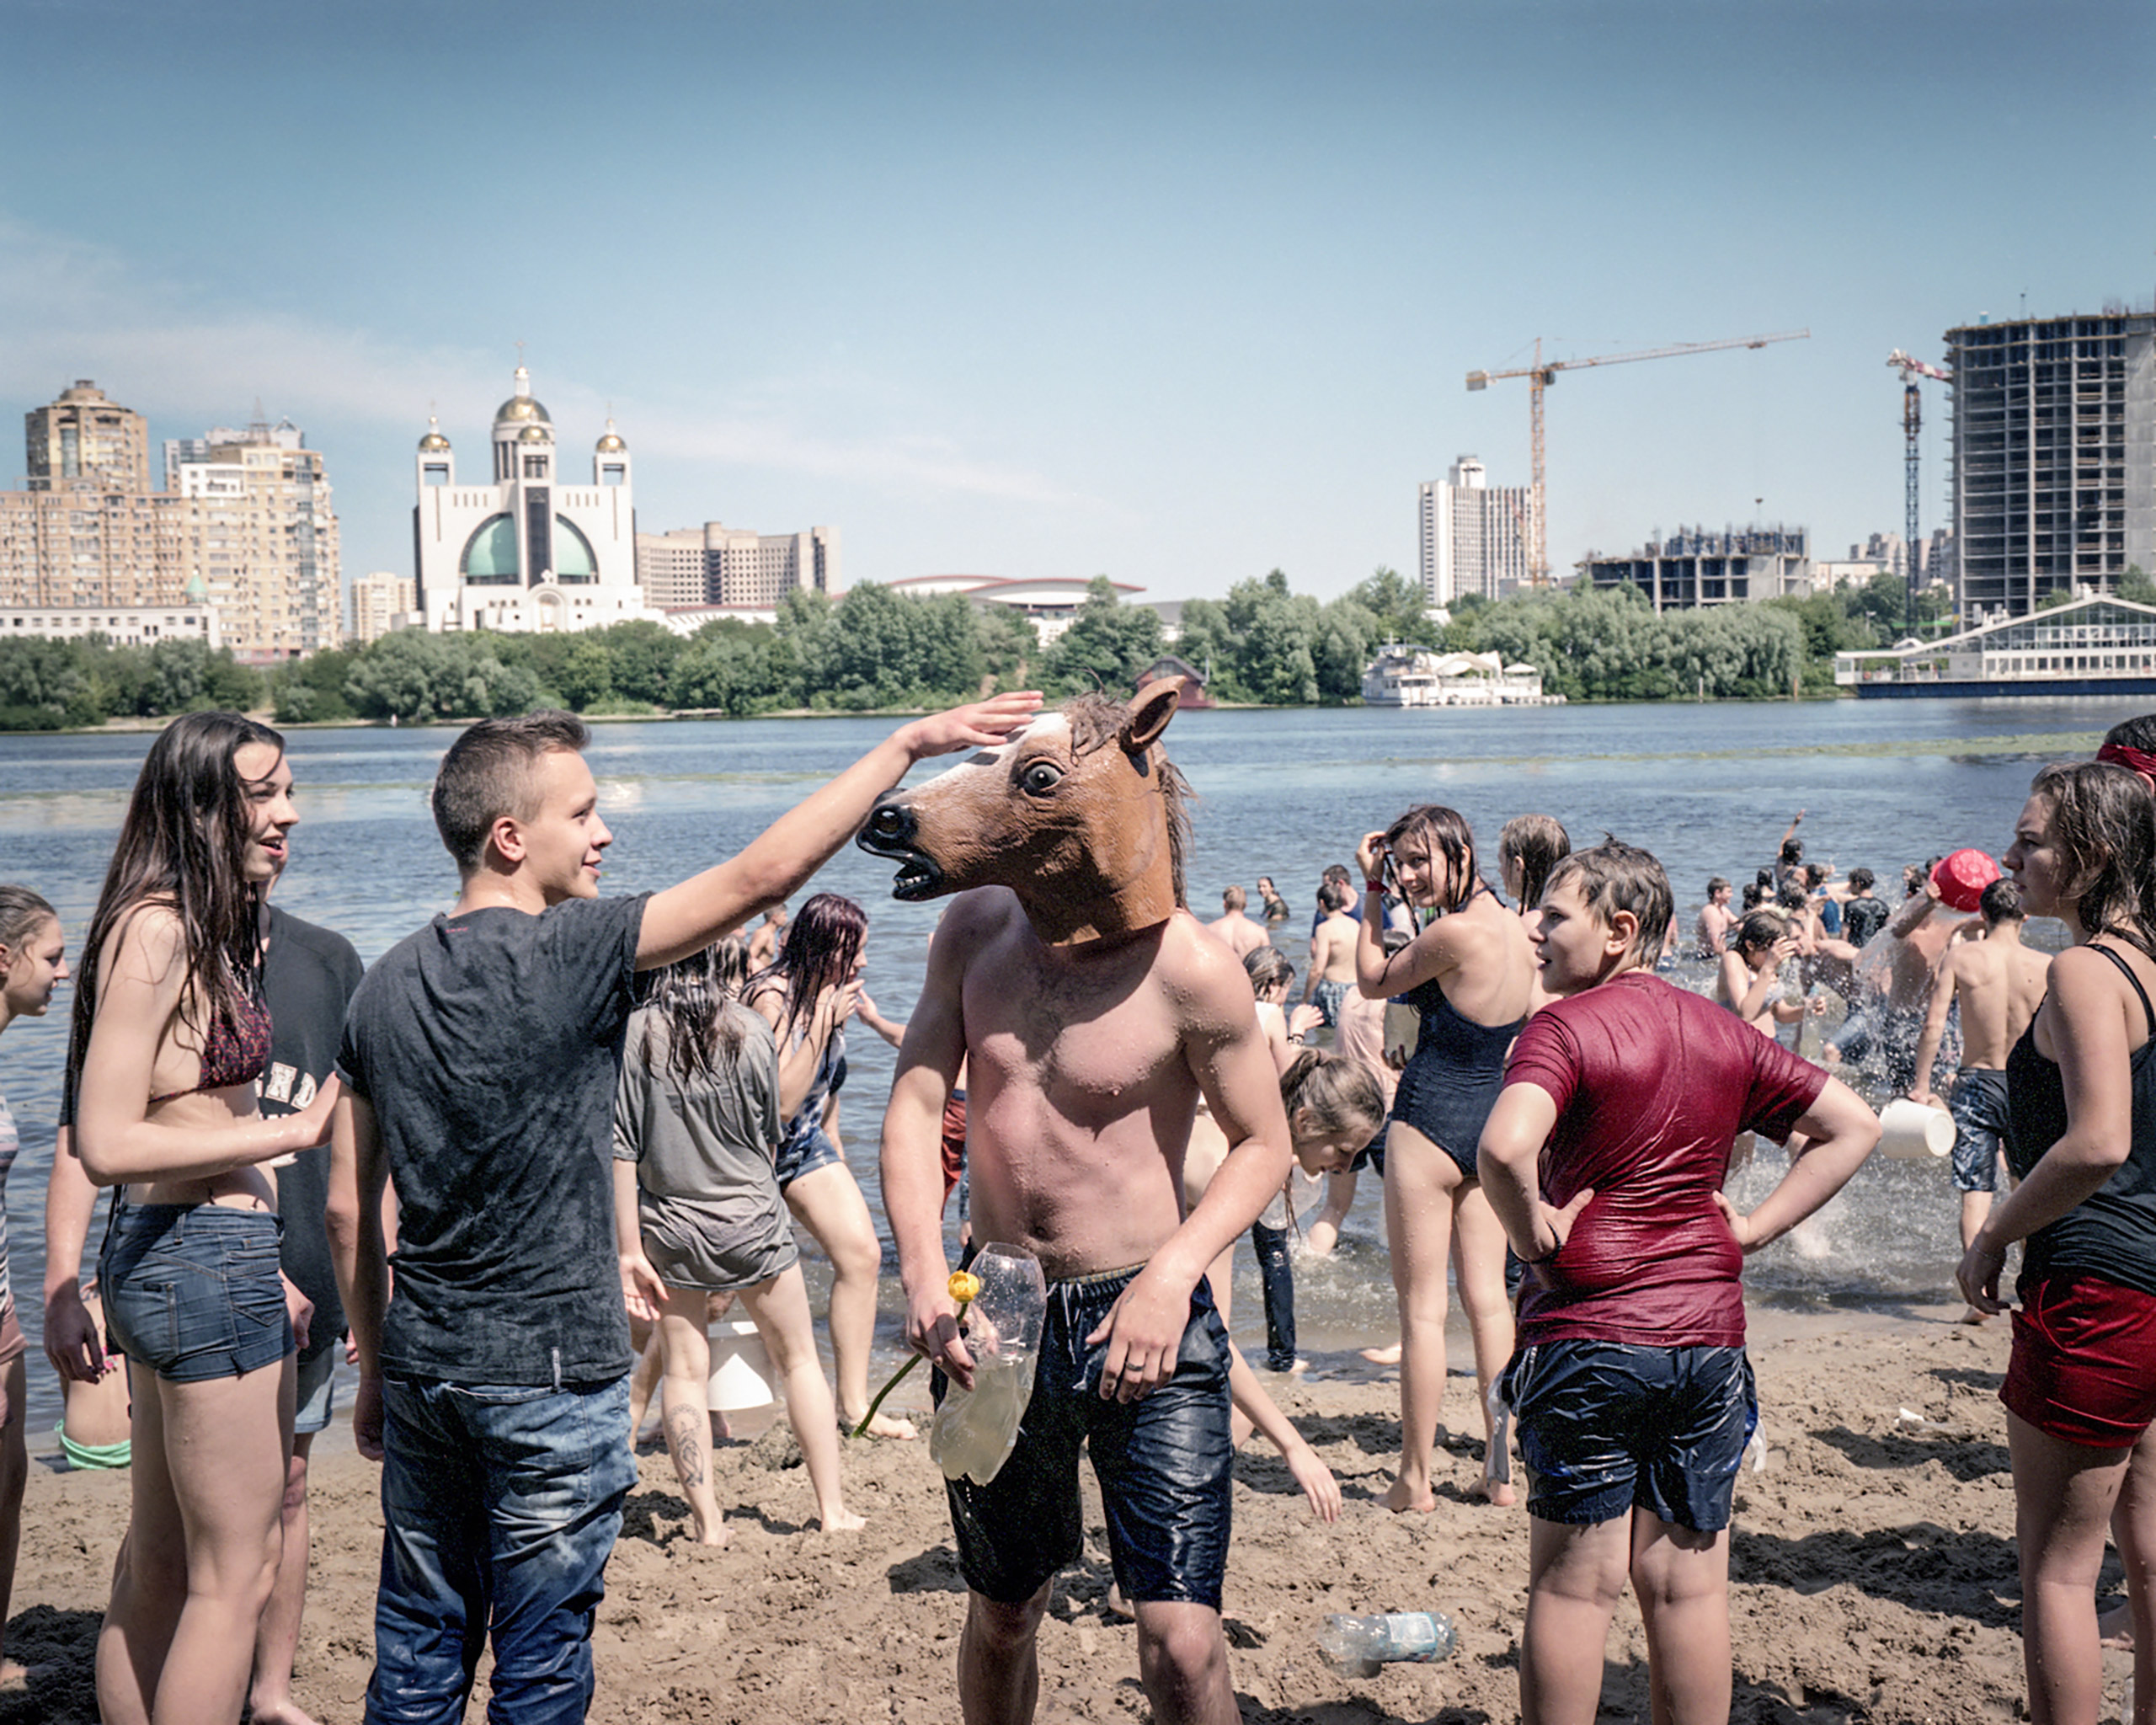 Youths play at the city beach on Dnieper River pouring water on each other. Hydropark is a landscape-recreational park on the Dnieper River. The Kiev metro station with the same name opened in 1965 and connected Hydropark Island  to the city and transformed the island to a summer resort for Kievans  Kiev, July 2015